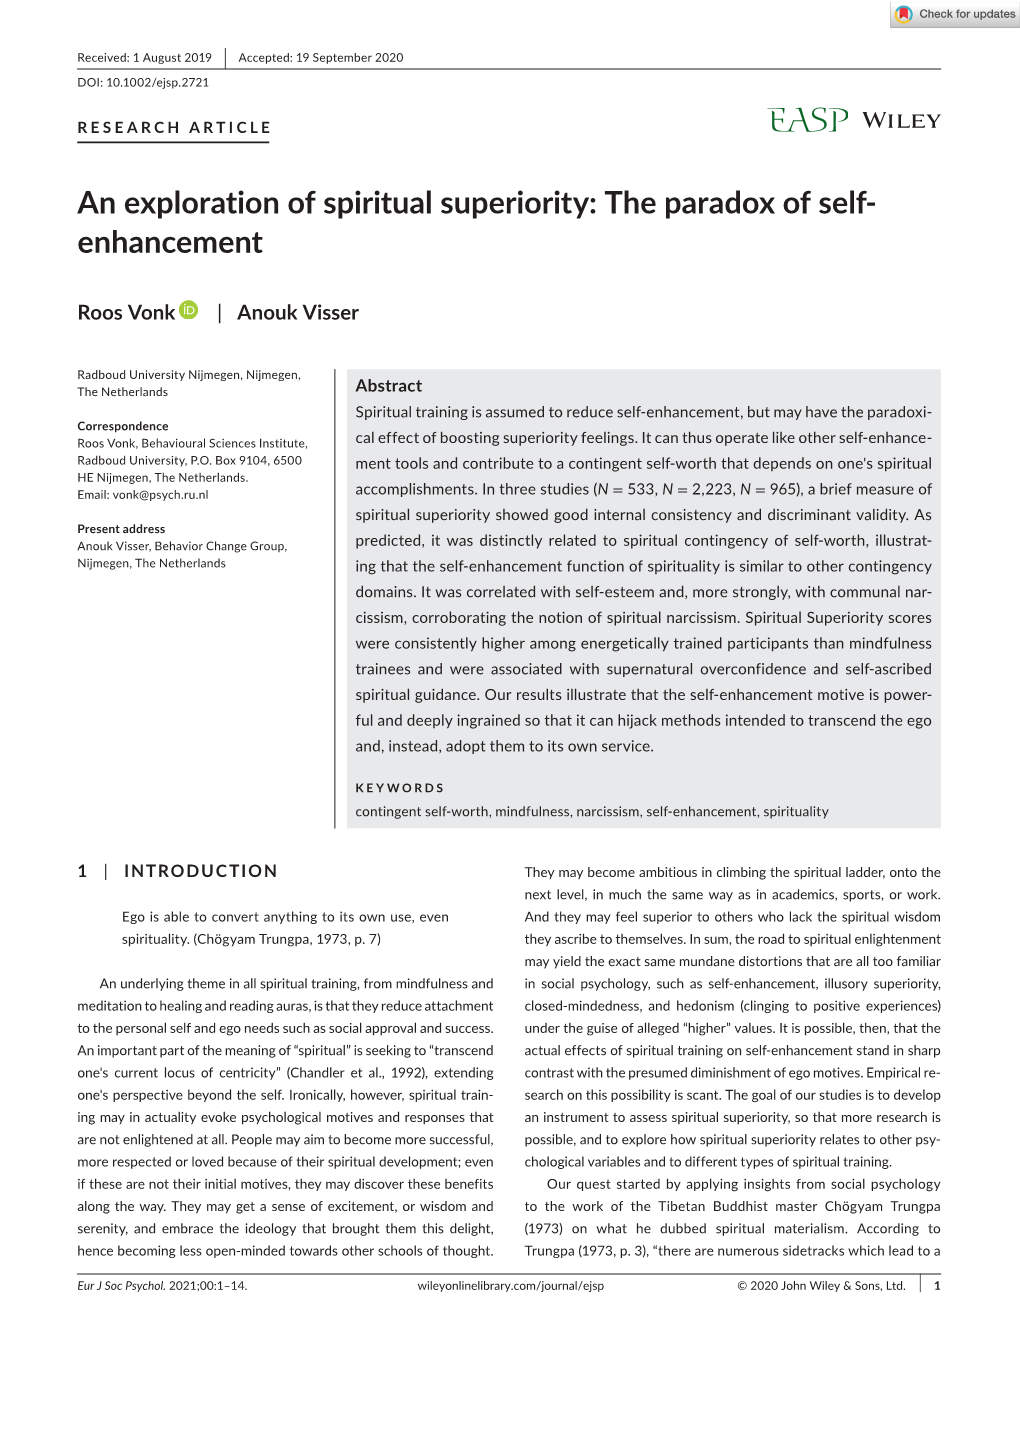 An Exploration of Spiritual Superiority: the Paradox of Self‐Enhancement